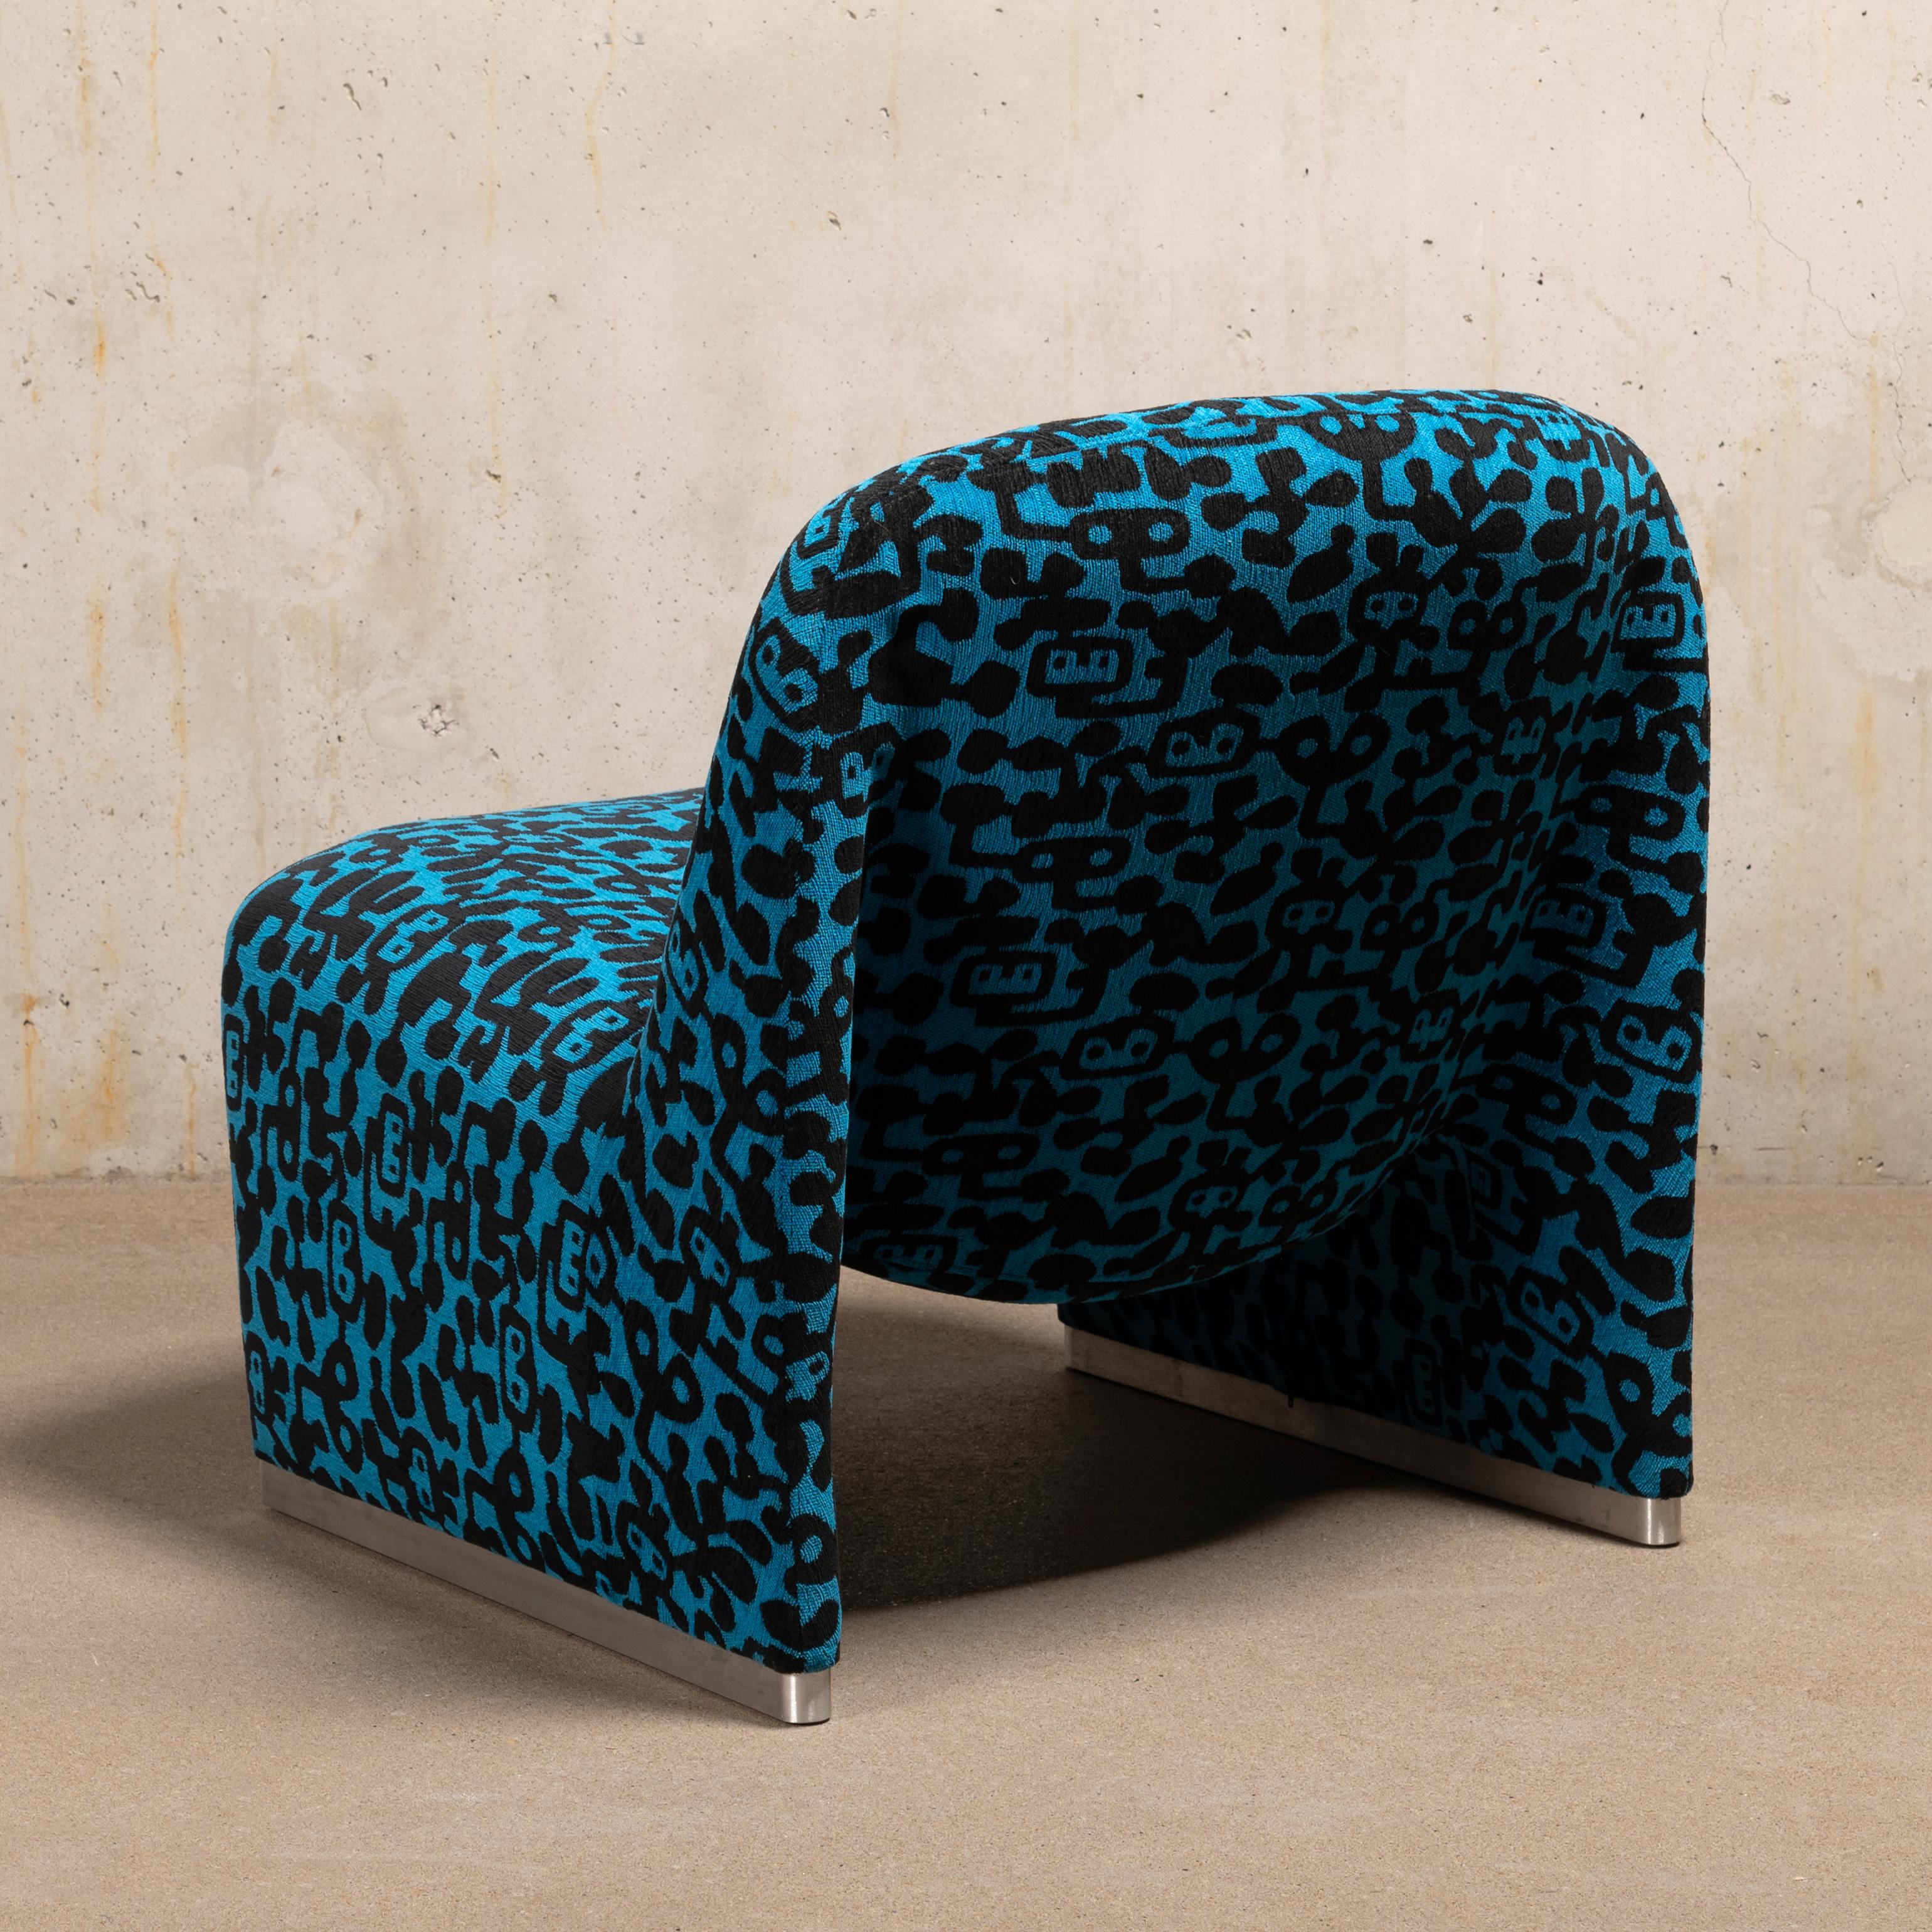 Dutch Giancarlo Piretti Alky Lounge Chair in Blue Fabric with Black Pattern, Artifort